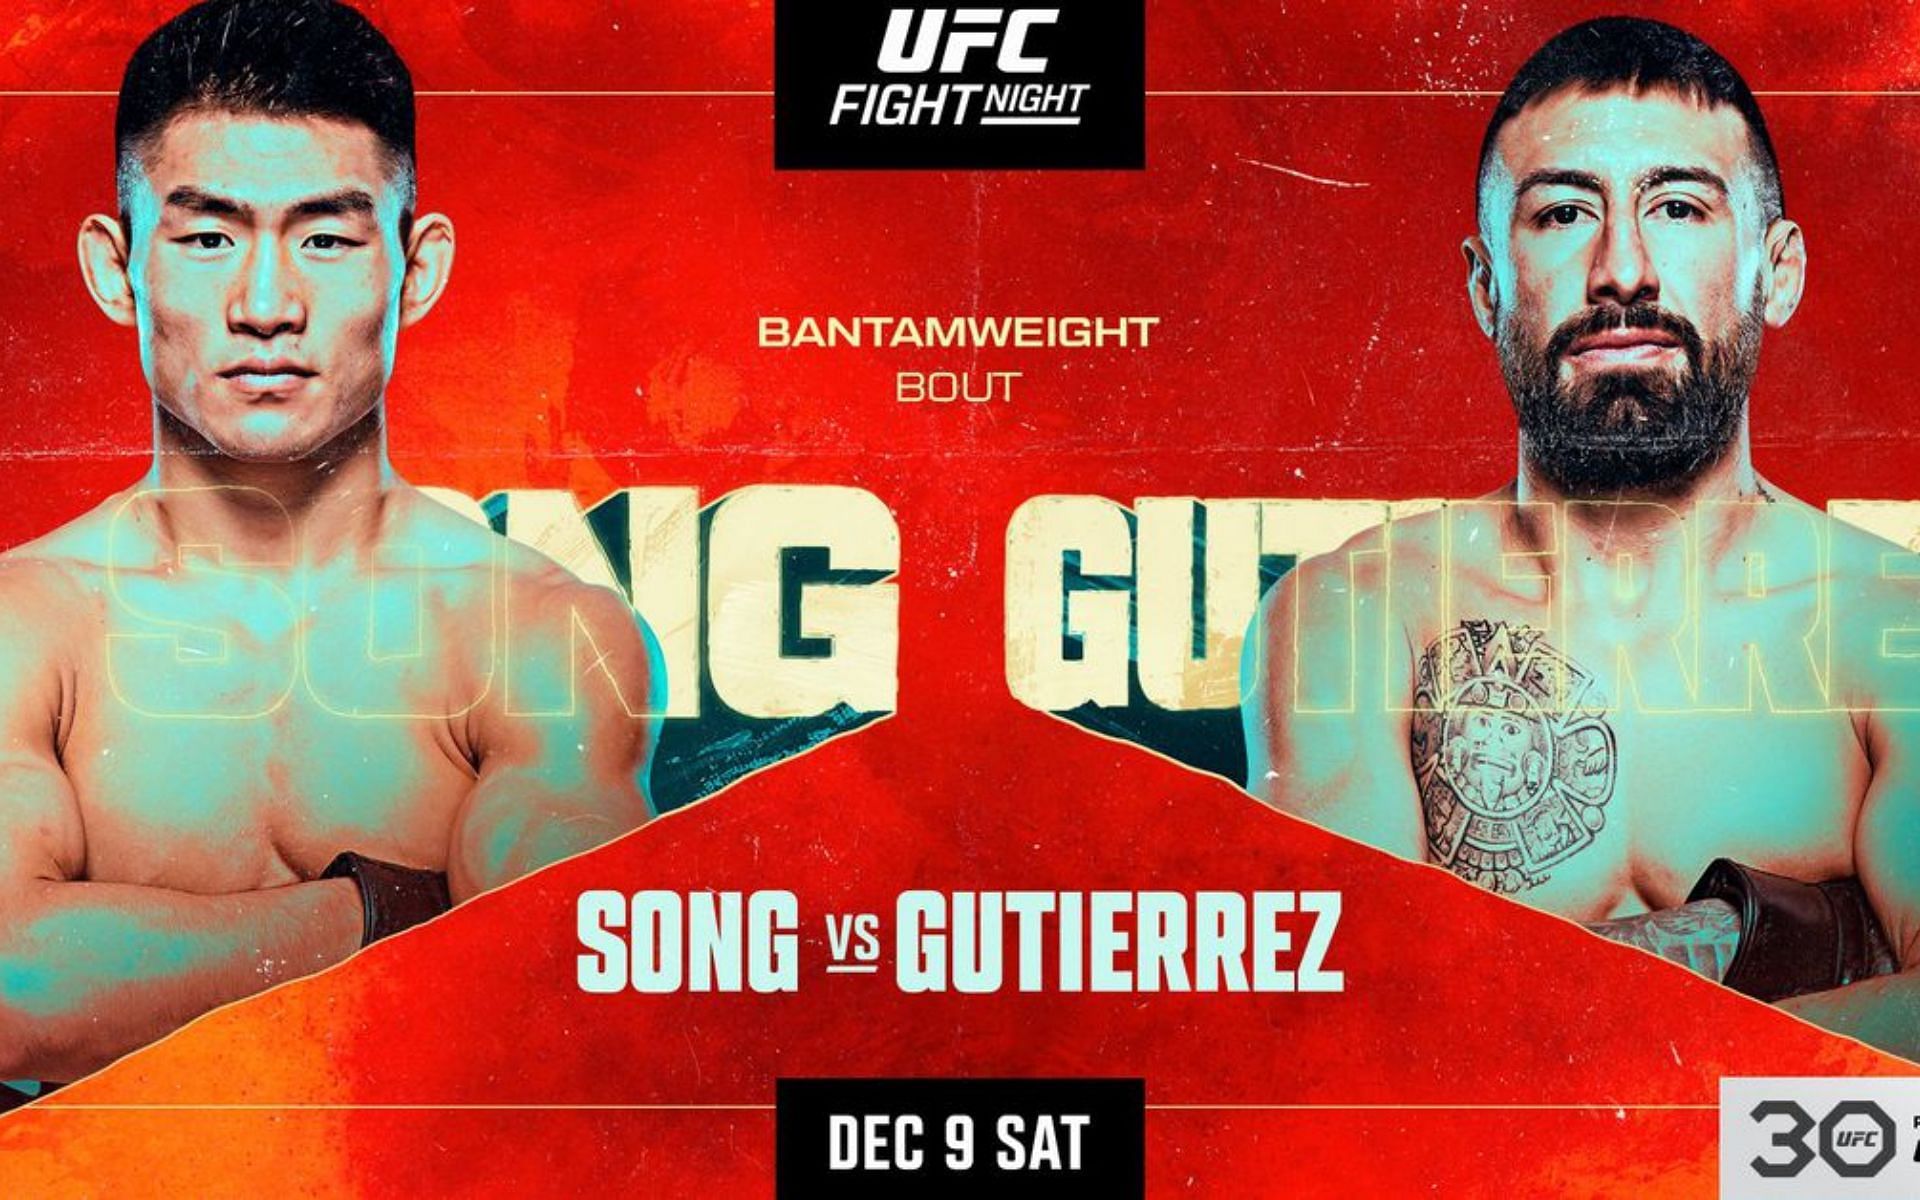 Song Yadong faces Chris Gutierrez in this weekend